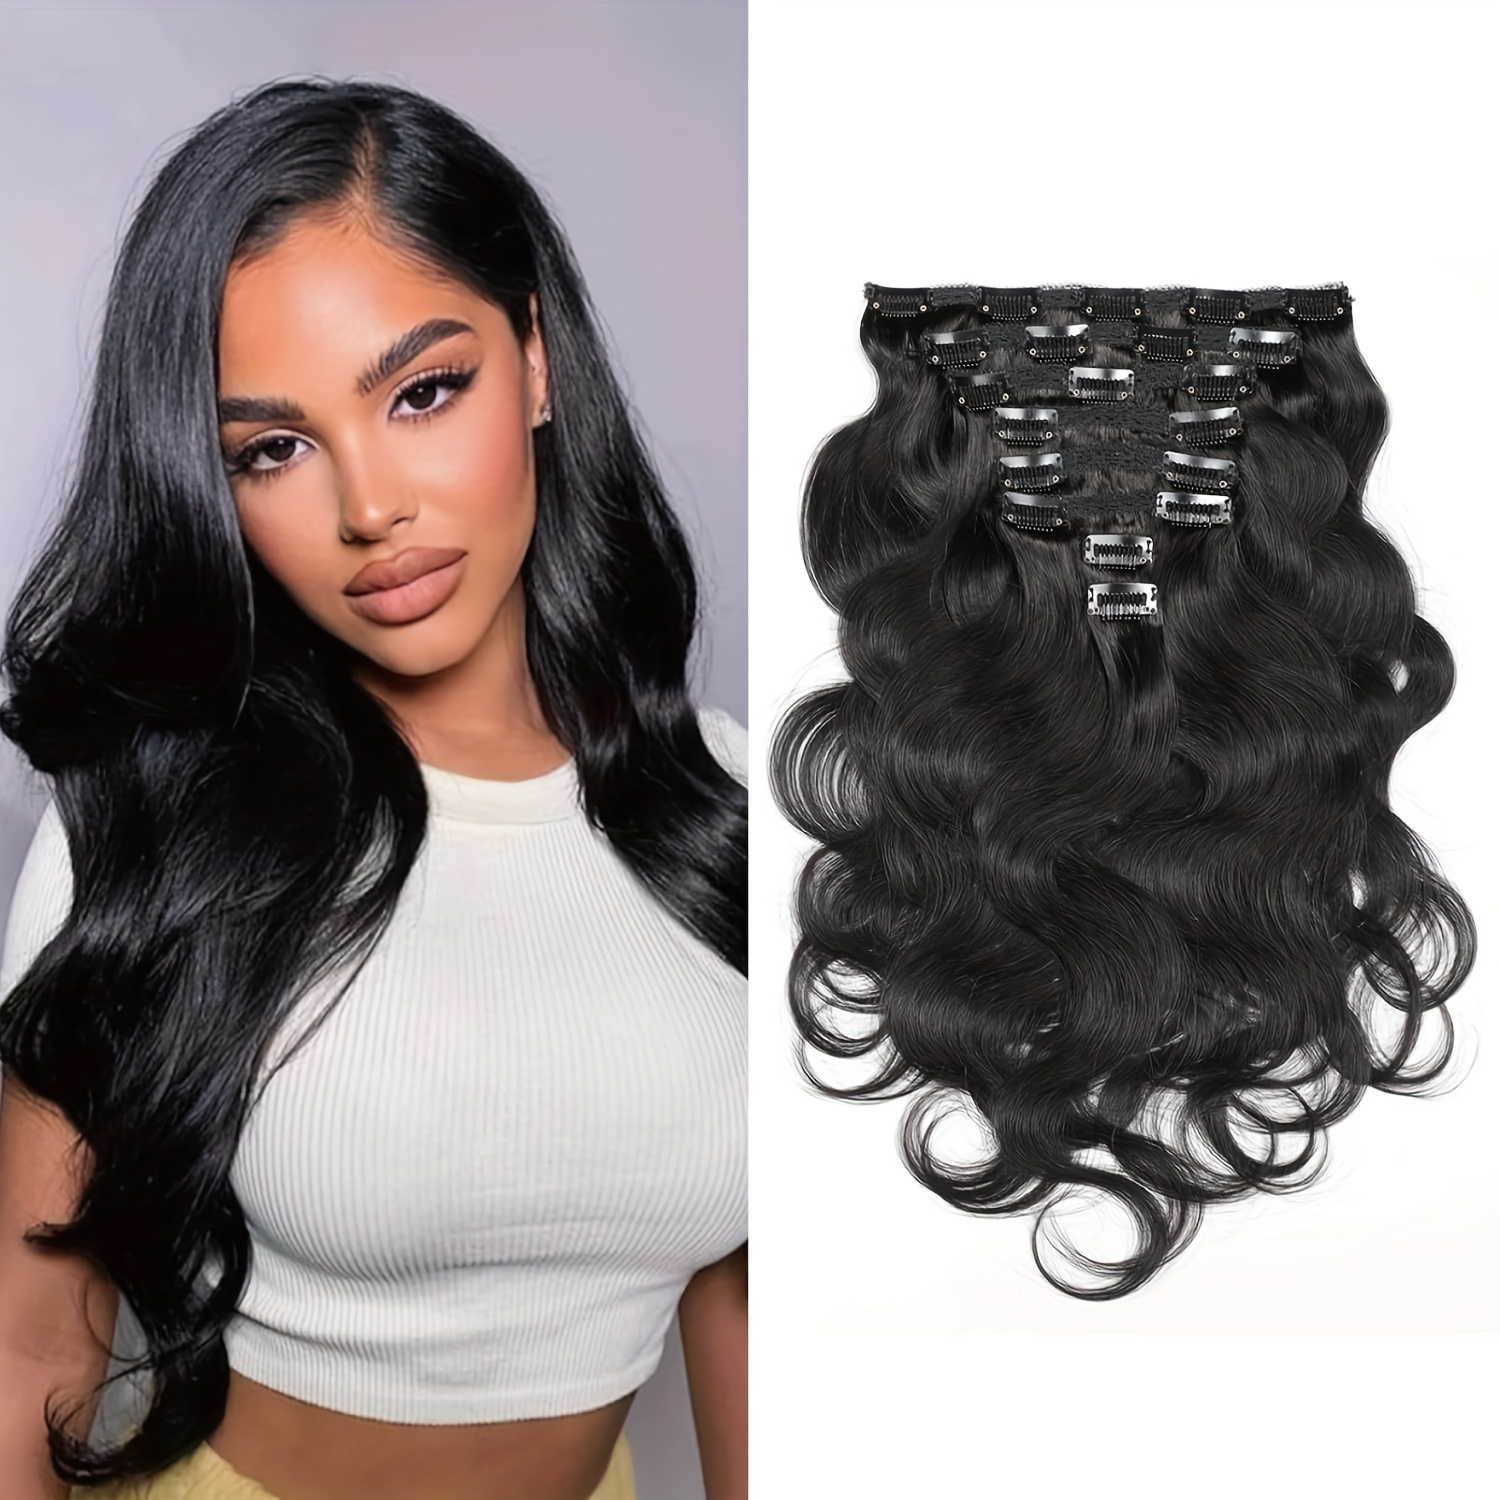 

Body Wave Clip Ins Human Hair 7pcs/set 100 Gram Body Wave Clip In Hair Extensions 10a Brazilian Virgin Human Hair For Women Natural Color (14-26 Inch)